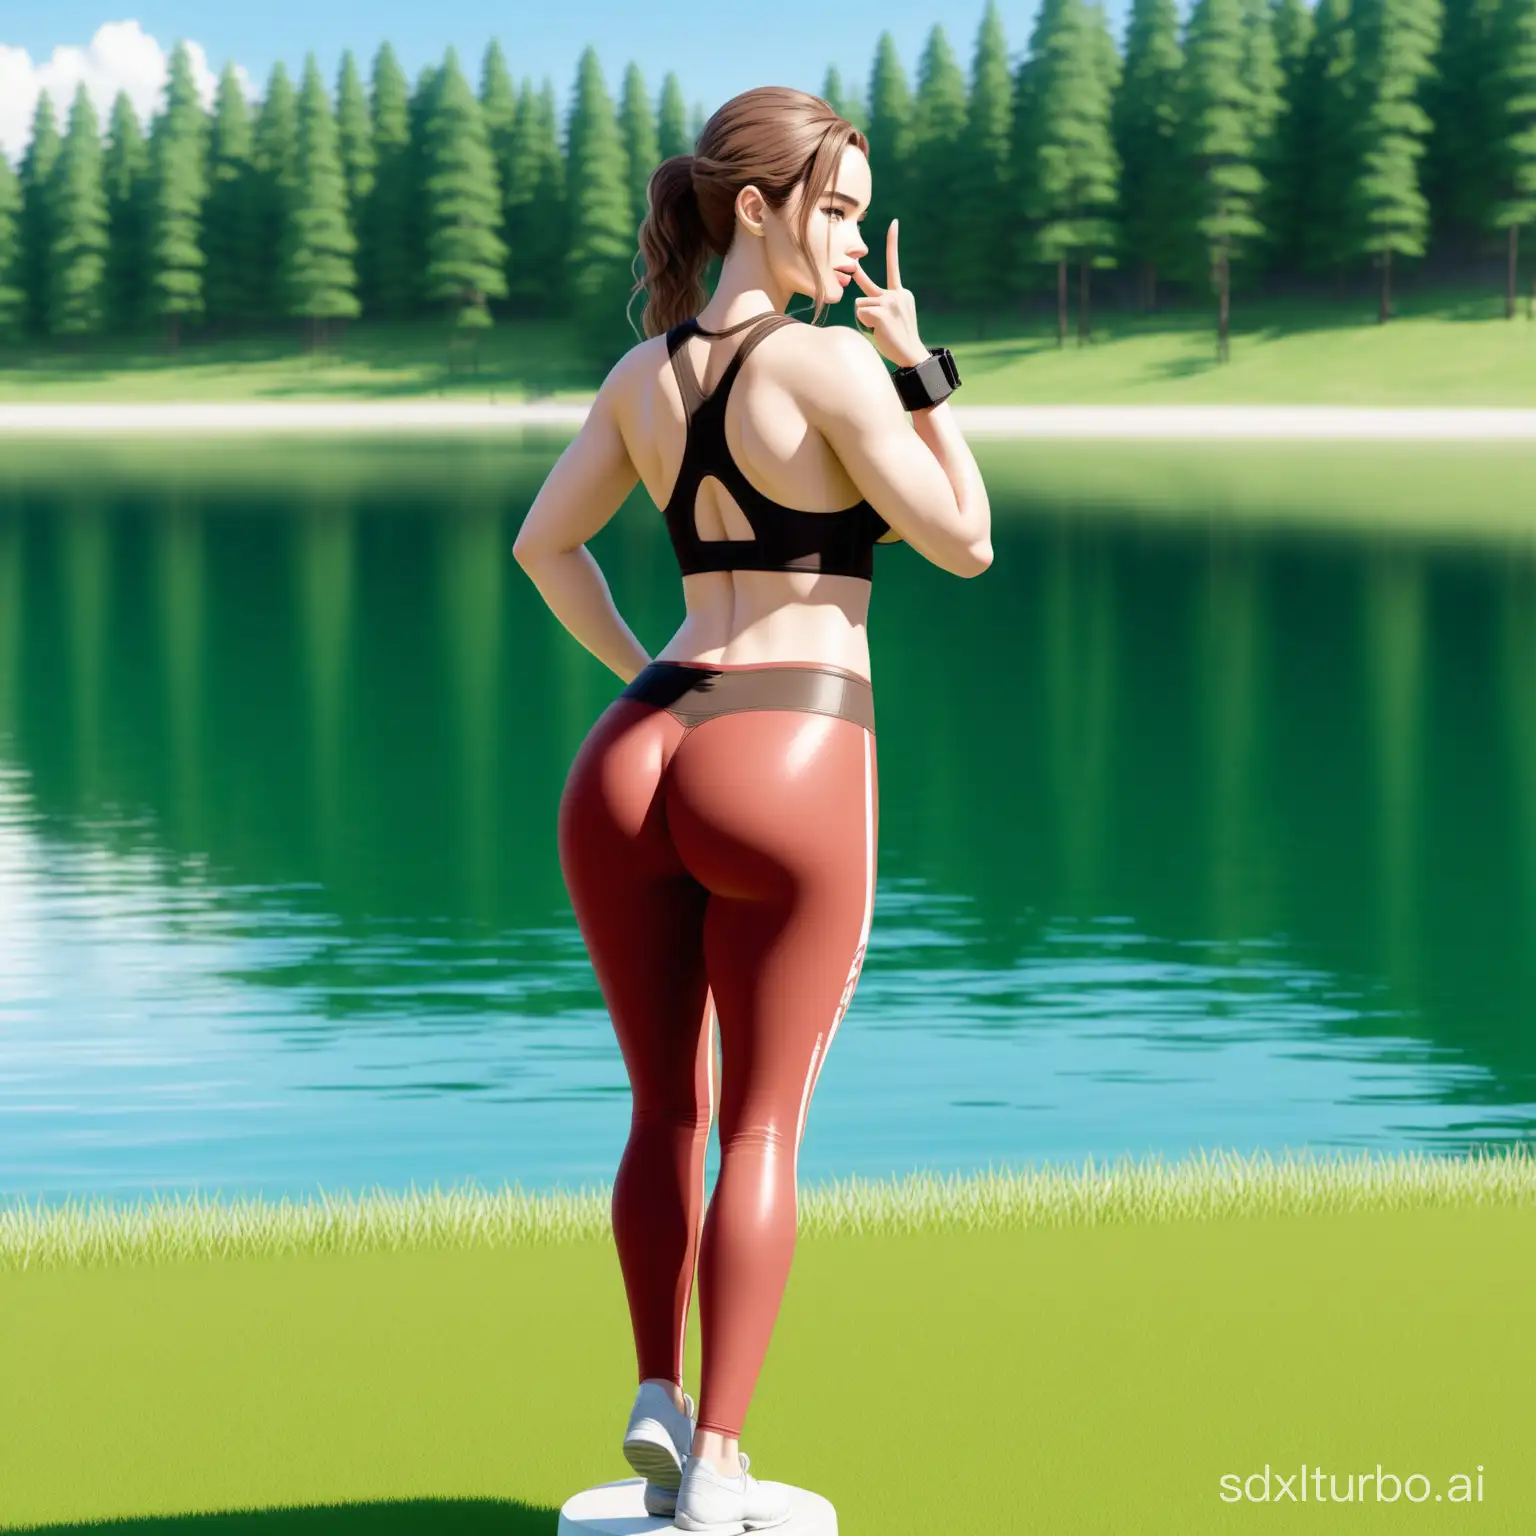 Busty gyaru Emilia Clarke as Lara Croft,V,underboob body suit for aerobics,rear view from behind,bright make up,doing aerobics on the shore of a lake,green lawn around,fitness equipment,sunny day,sky reflected in the lake,style raw,3d isekai style,real photograph,cowboy shot.